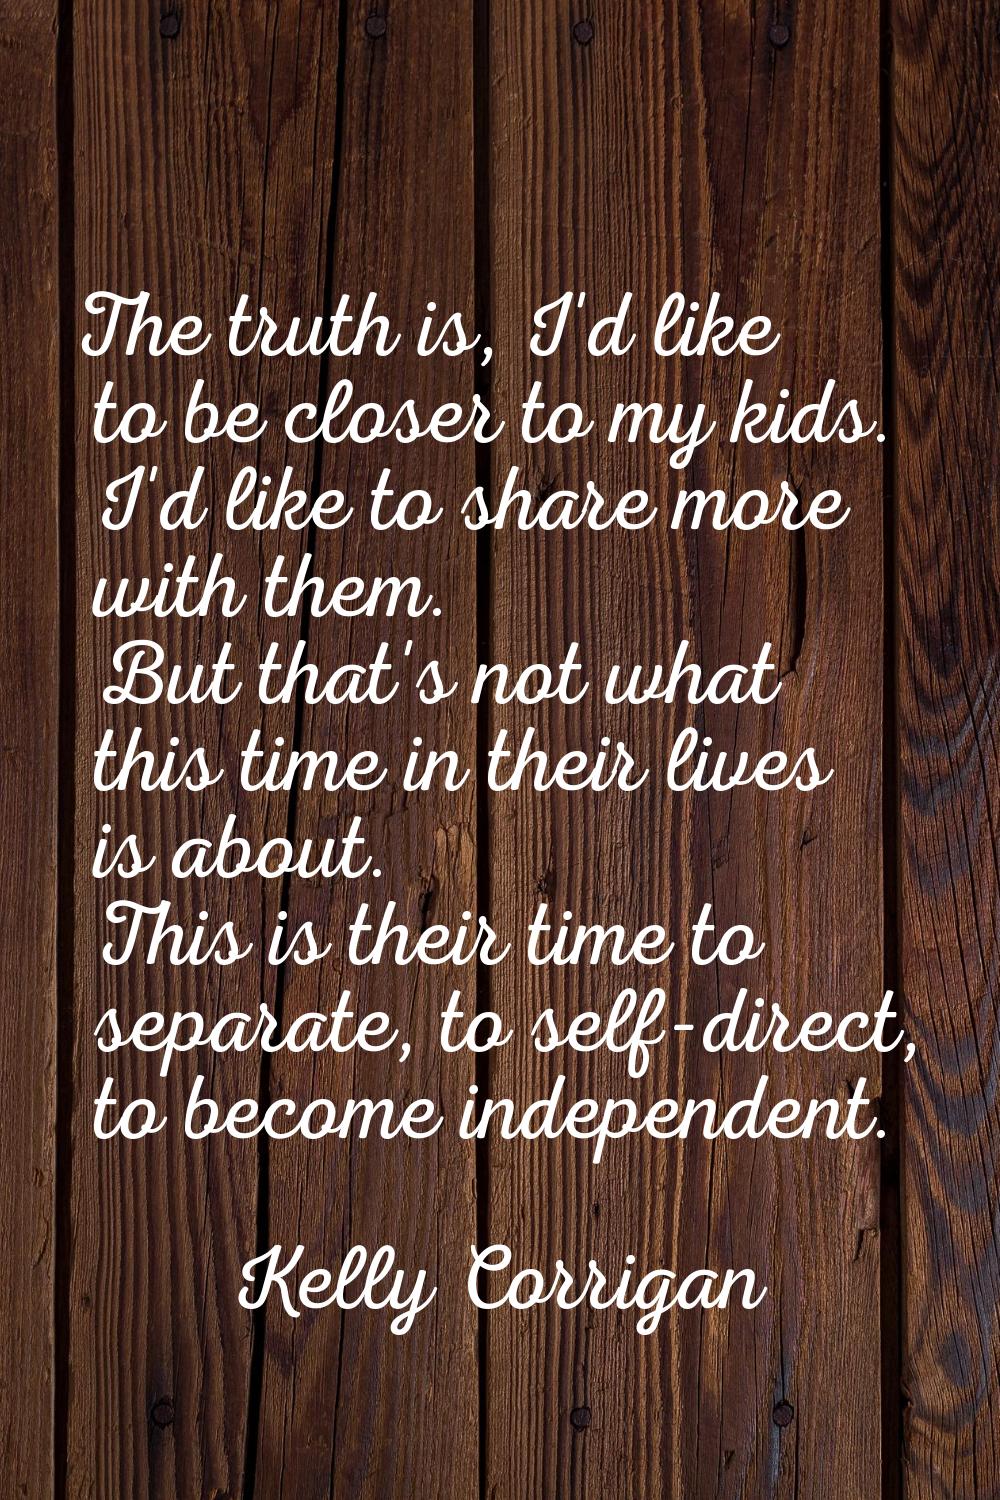 The truth is, I'd like to be closer to my kids. I'd like to share more with them. But that's not wh